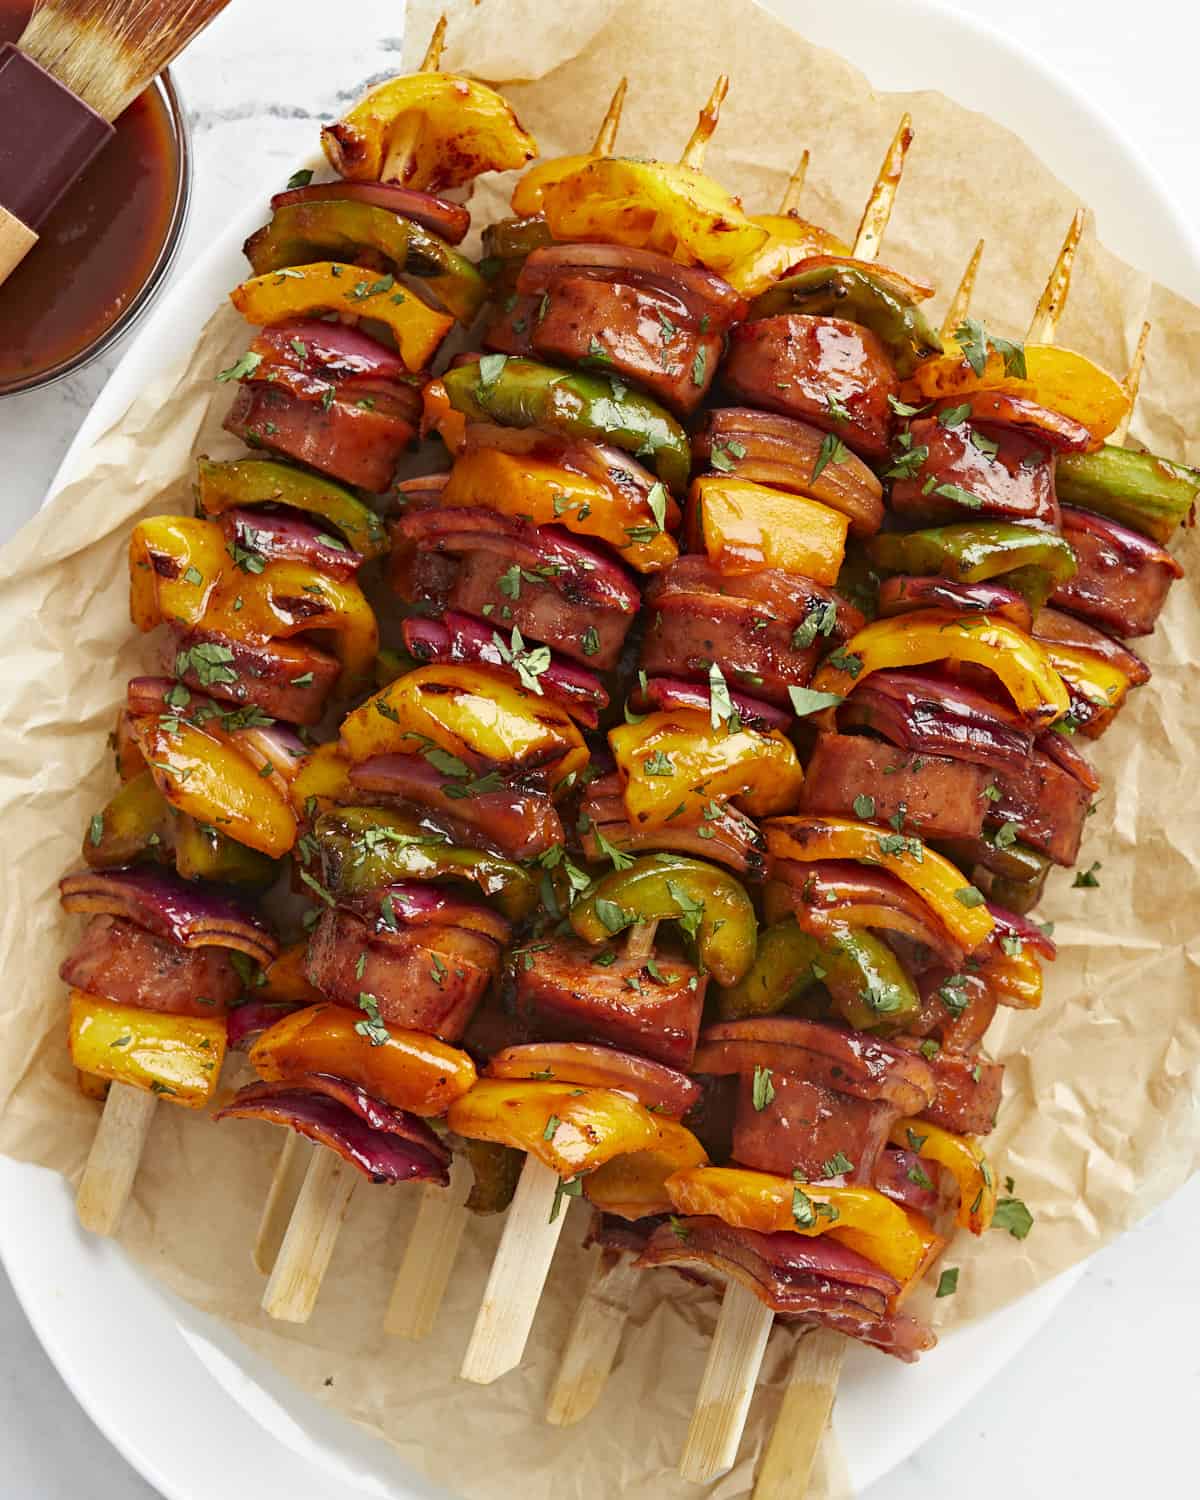 Overhead view of sausage kebabs on a serving platter with parchment paper.